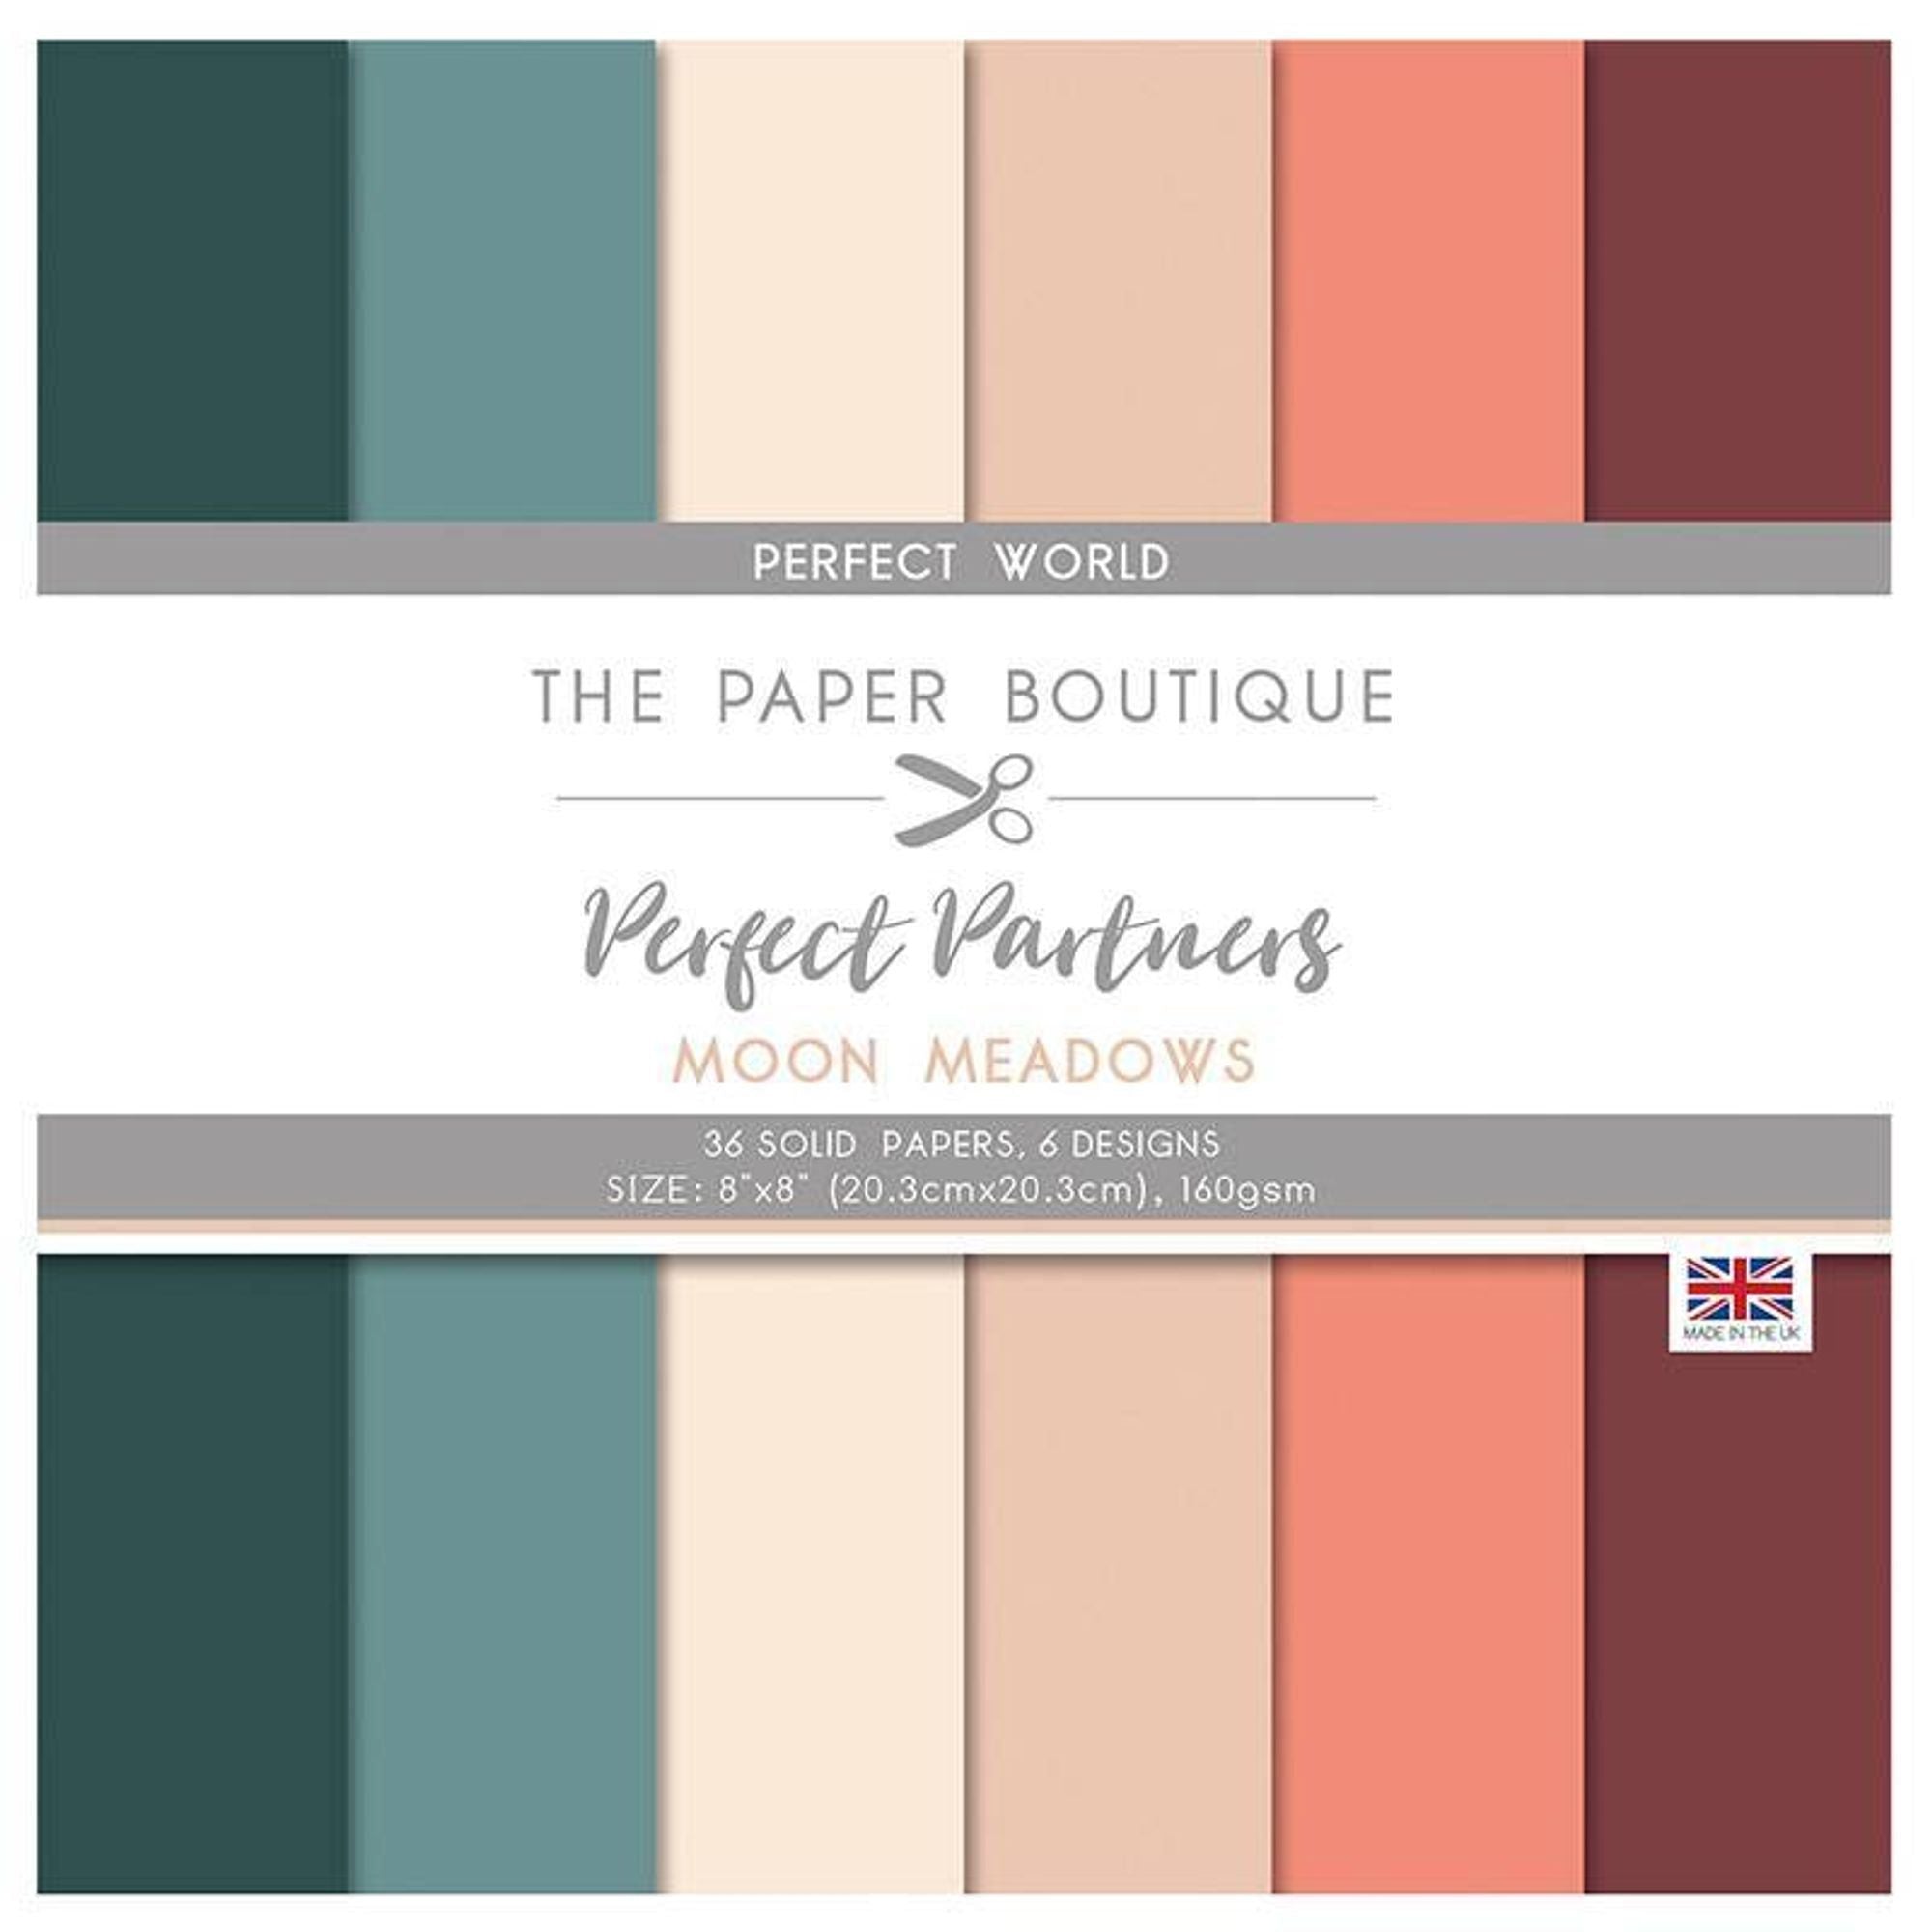 The Paper Boutique Perfect Partners - Moon Meadows 8x8 Solids